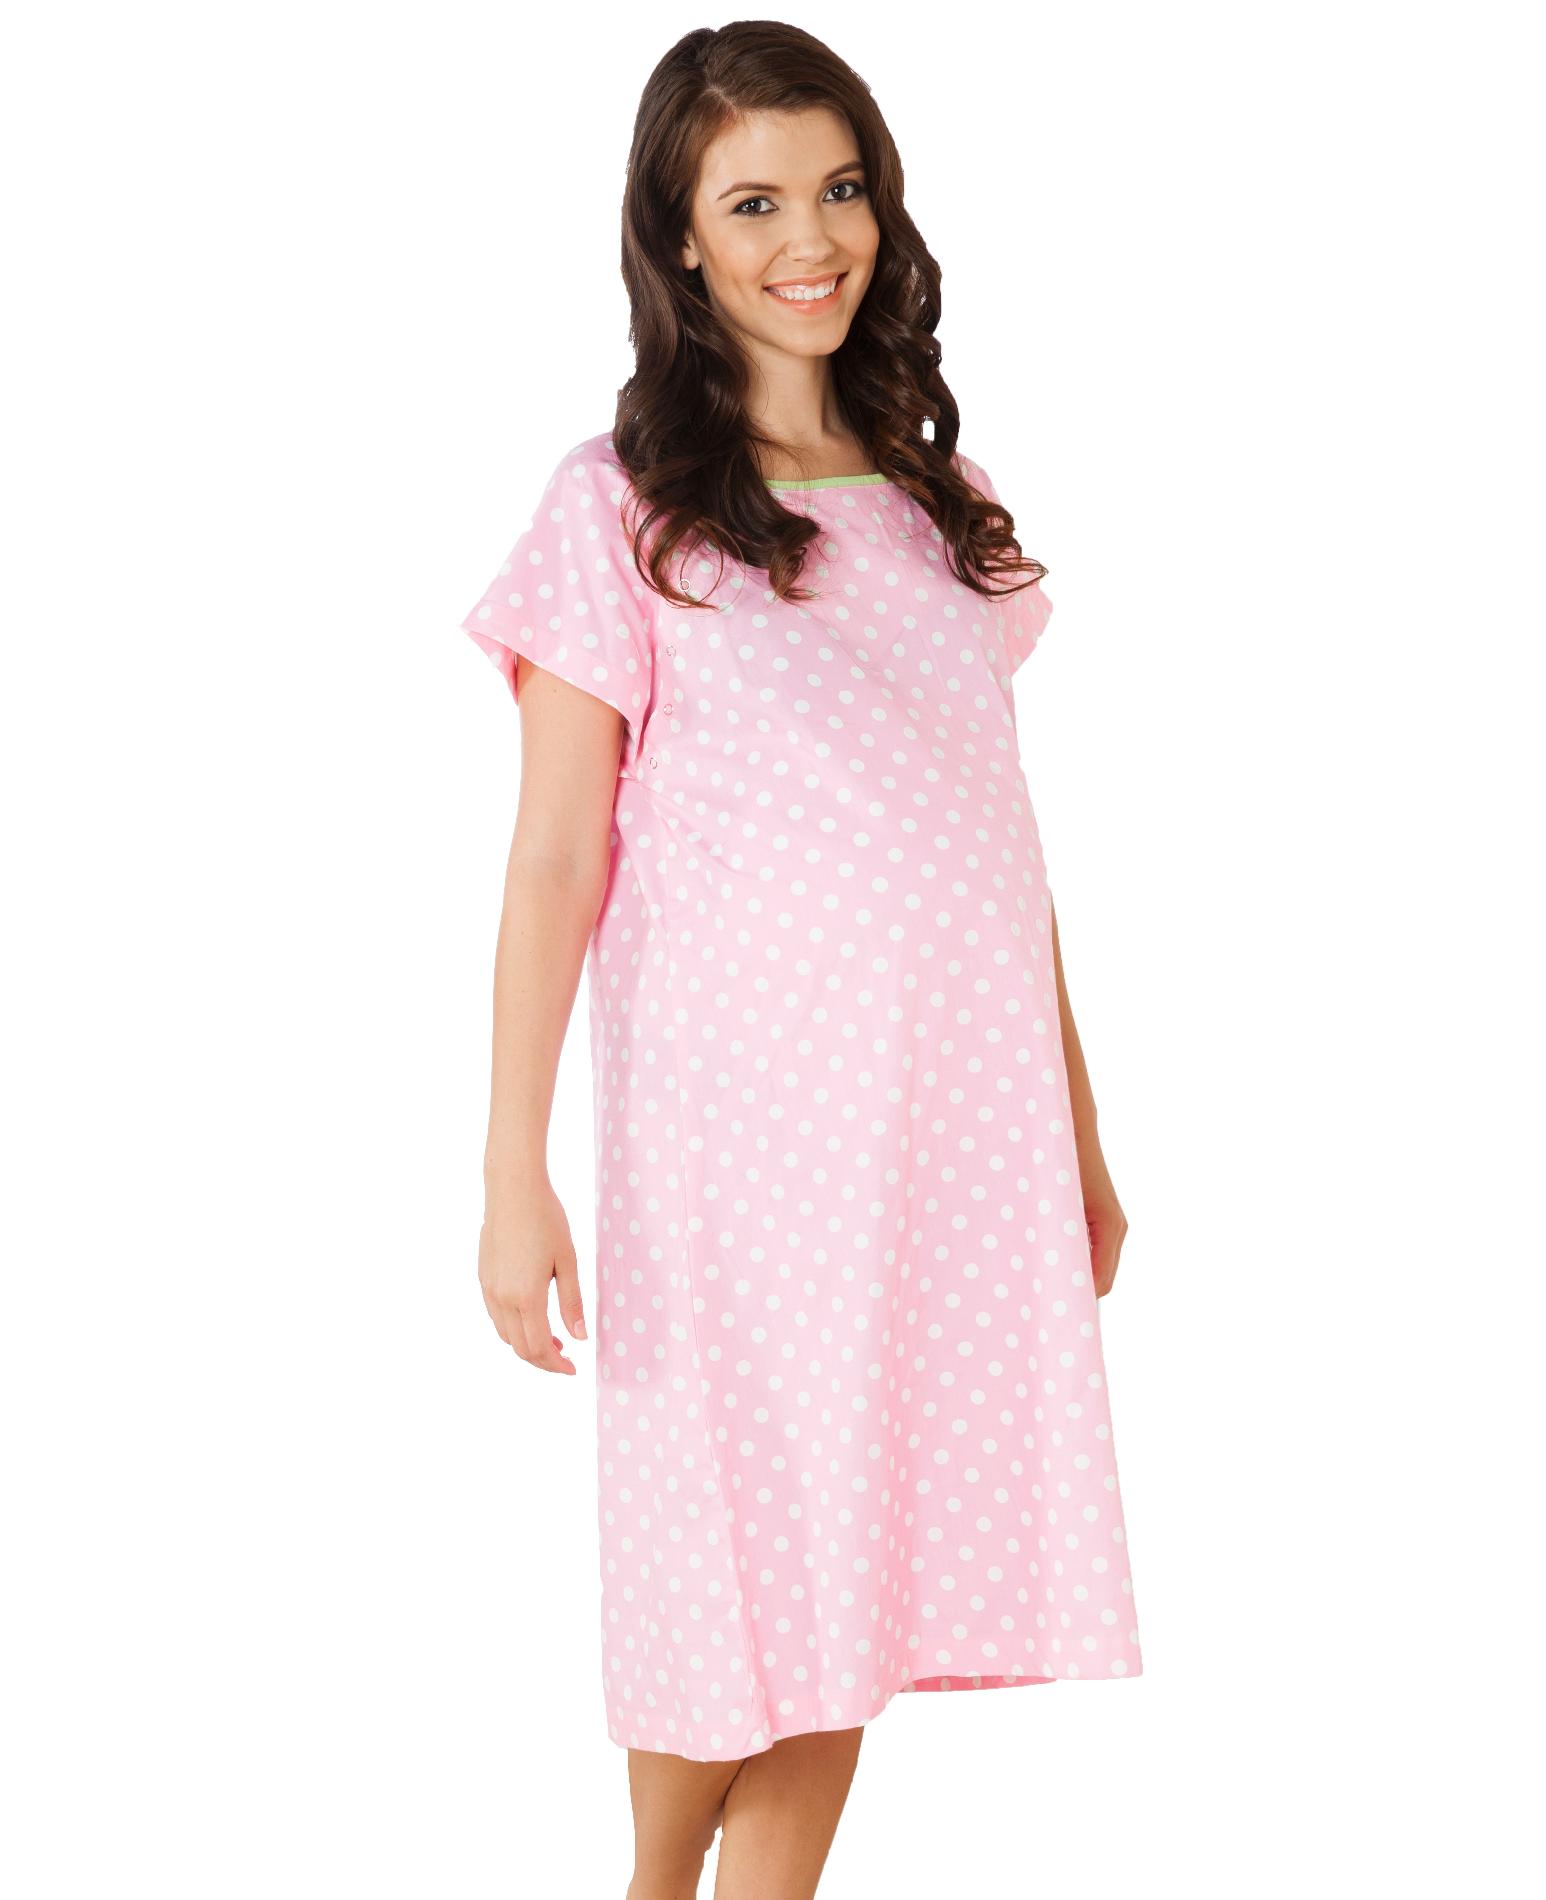 Molly Gownie Hospital Gown with Pillowcase